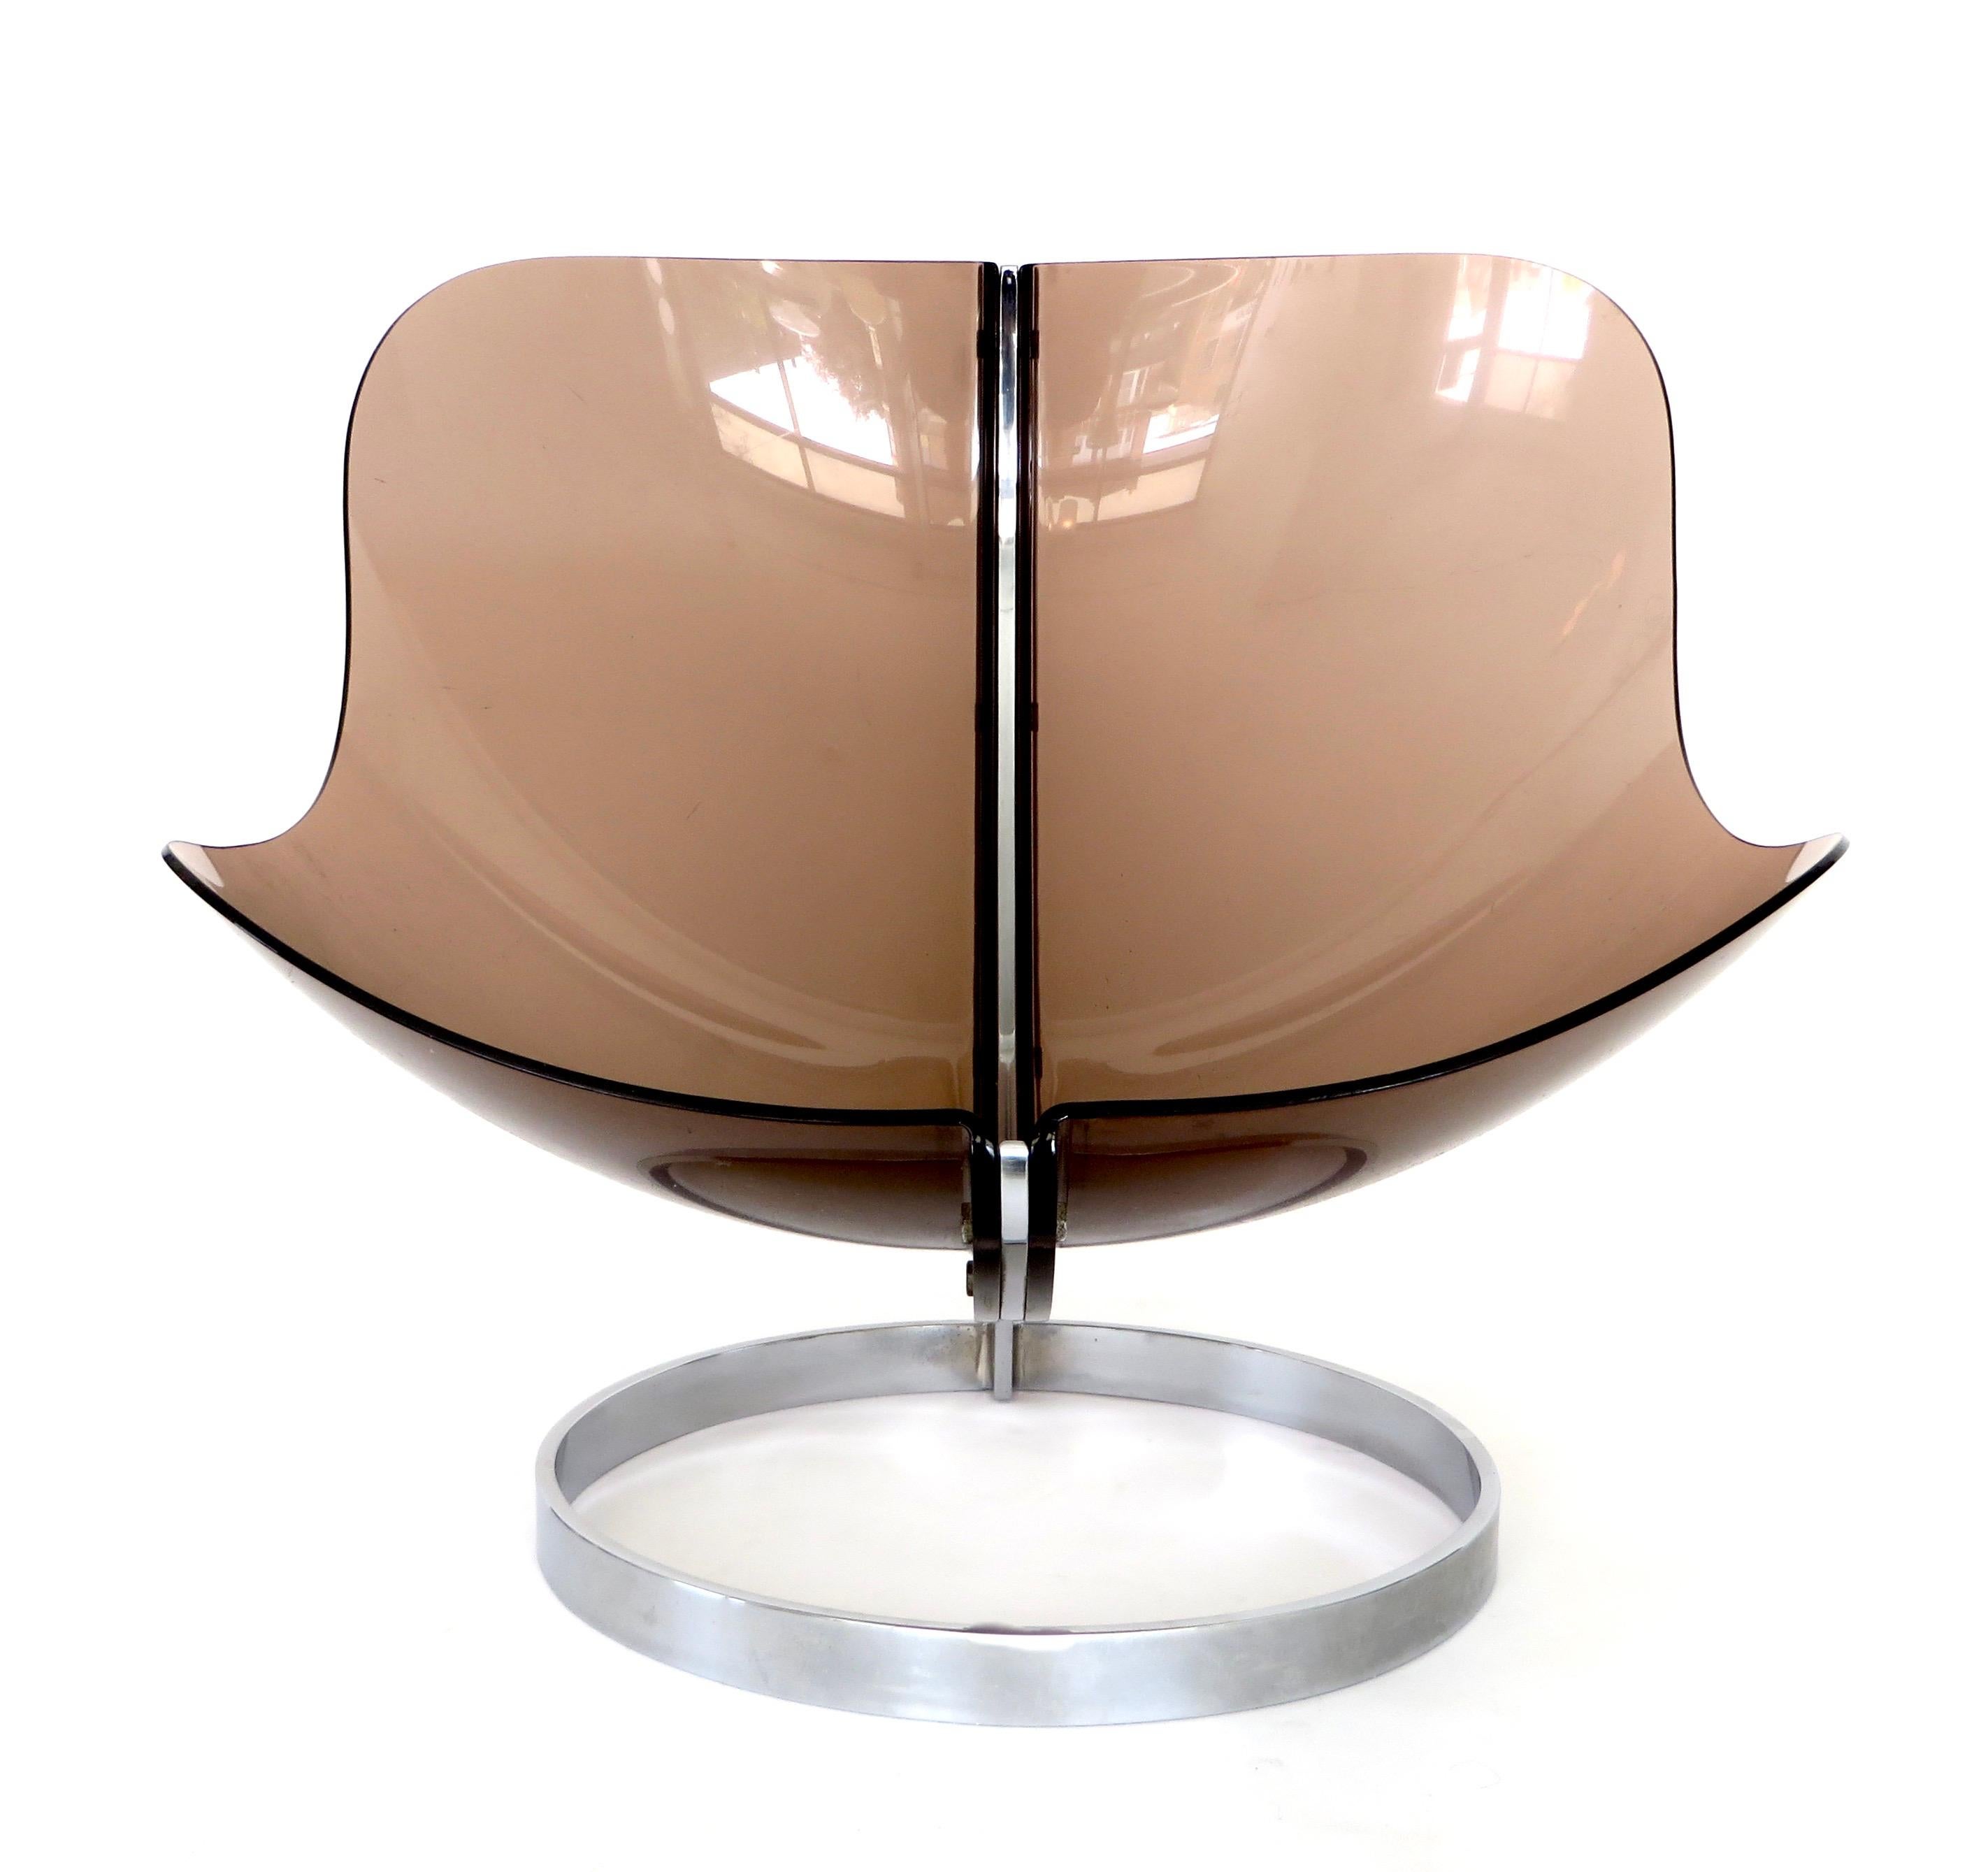 Boris Tabacoff French Sphere Chair Lucite Altuglas and Chrome c1971 1